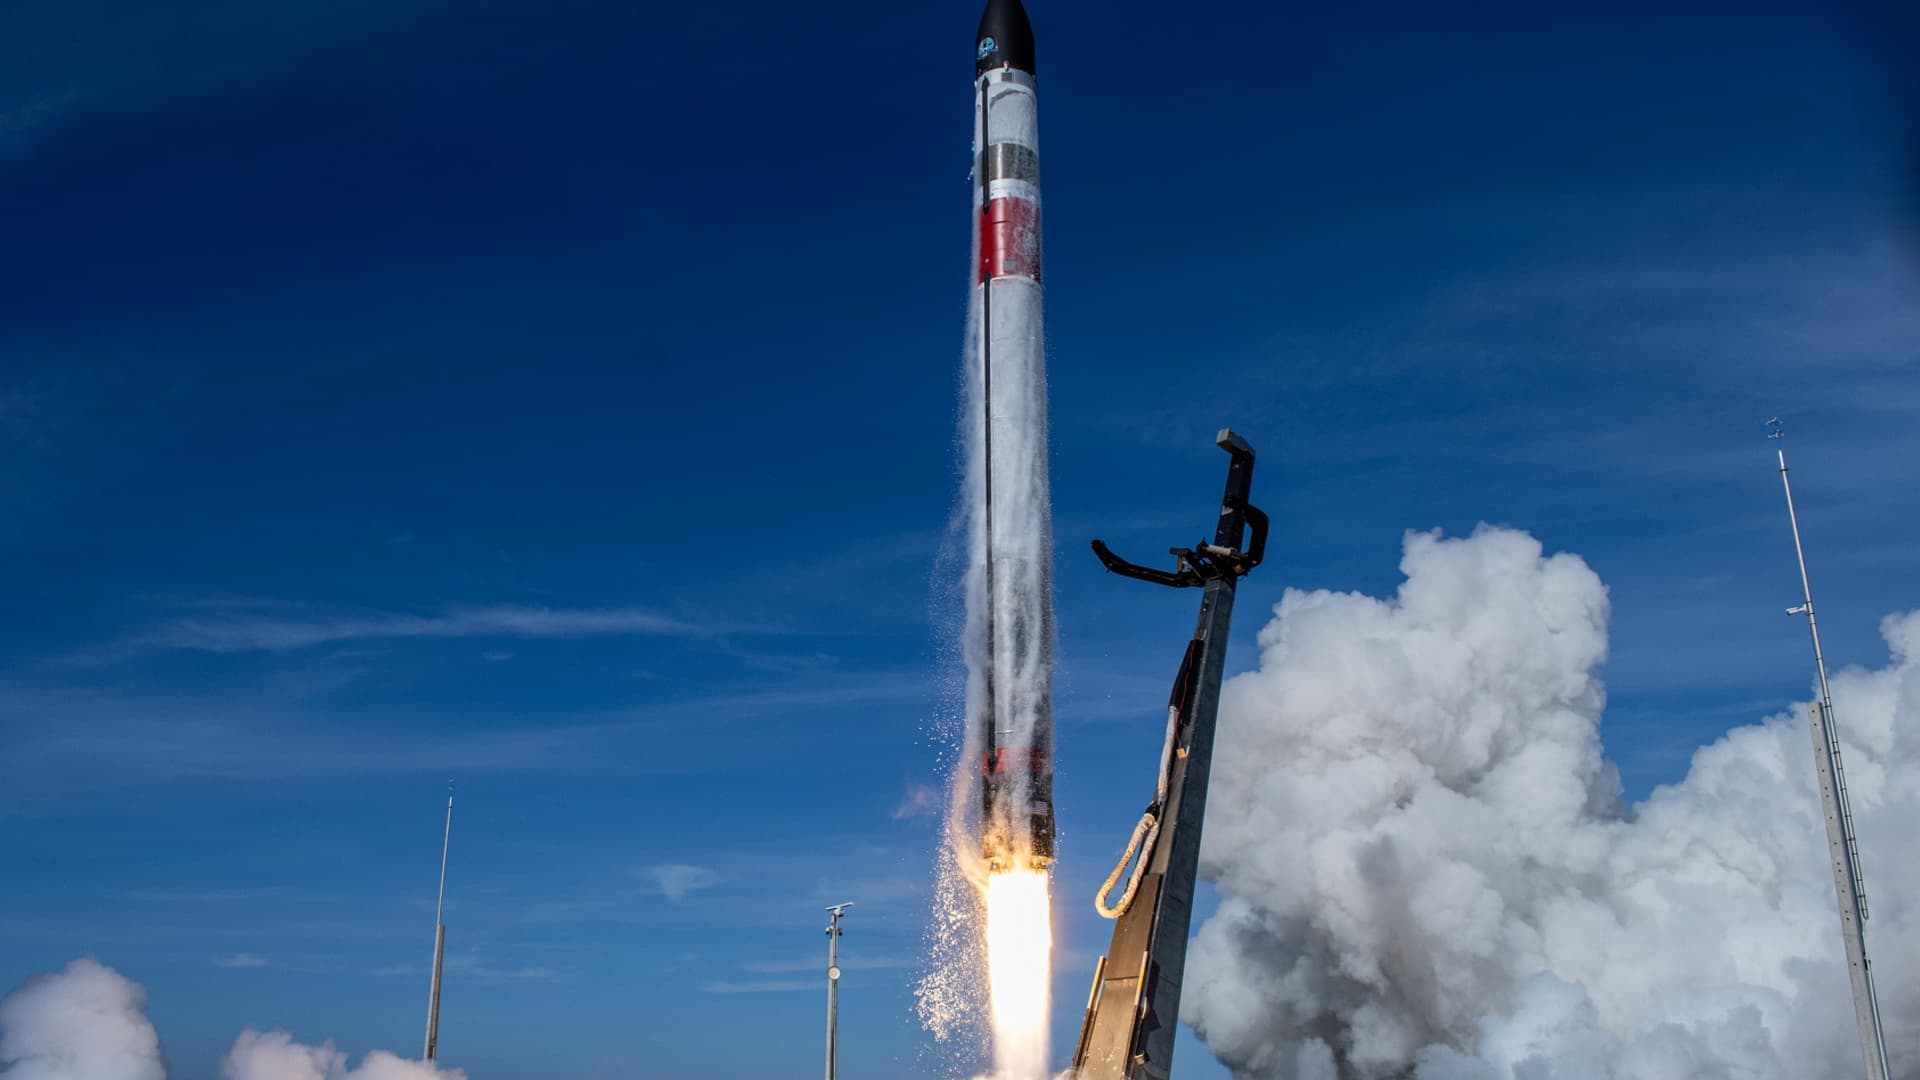 Rocket Lab might surge 55% as chief in launch market, Cowen says